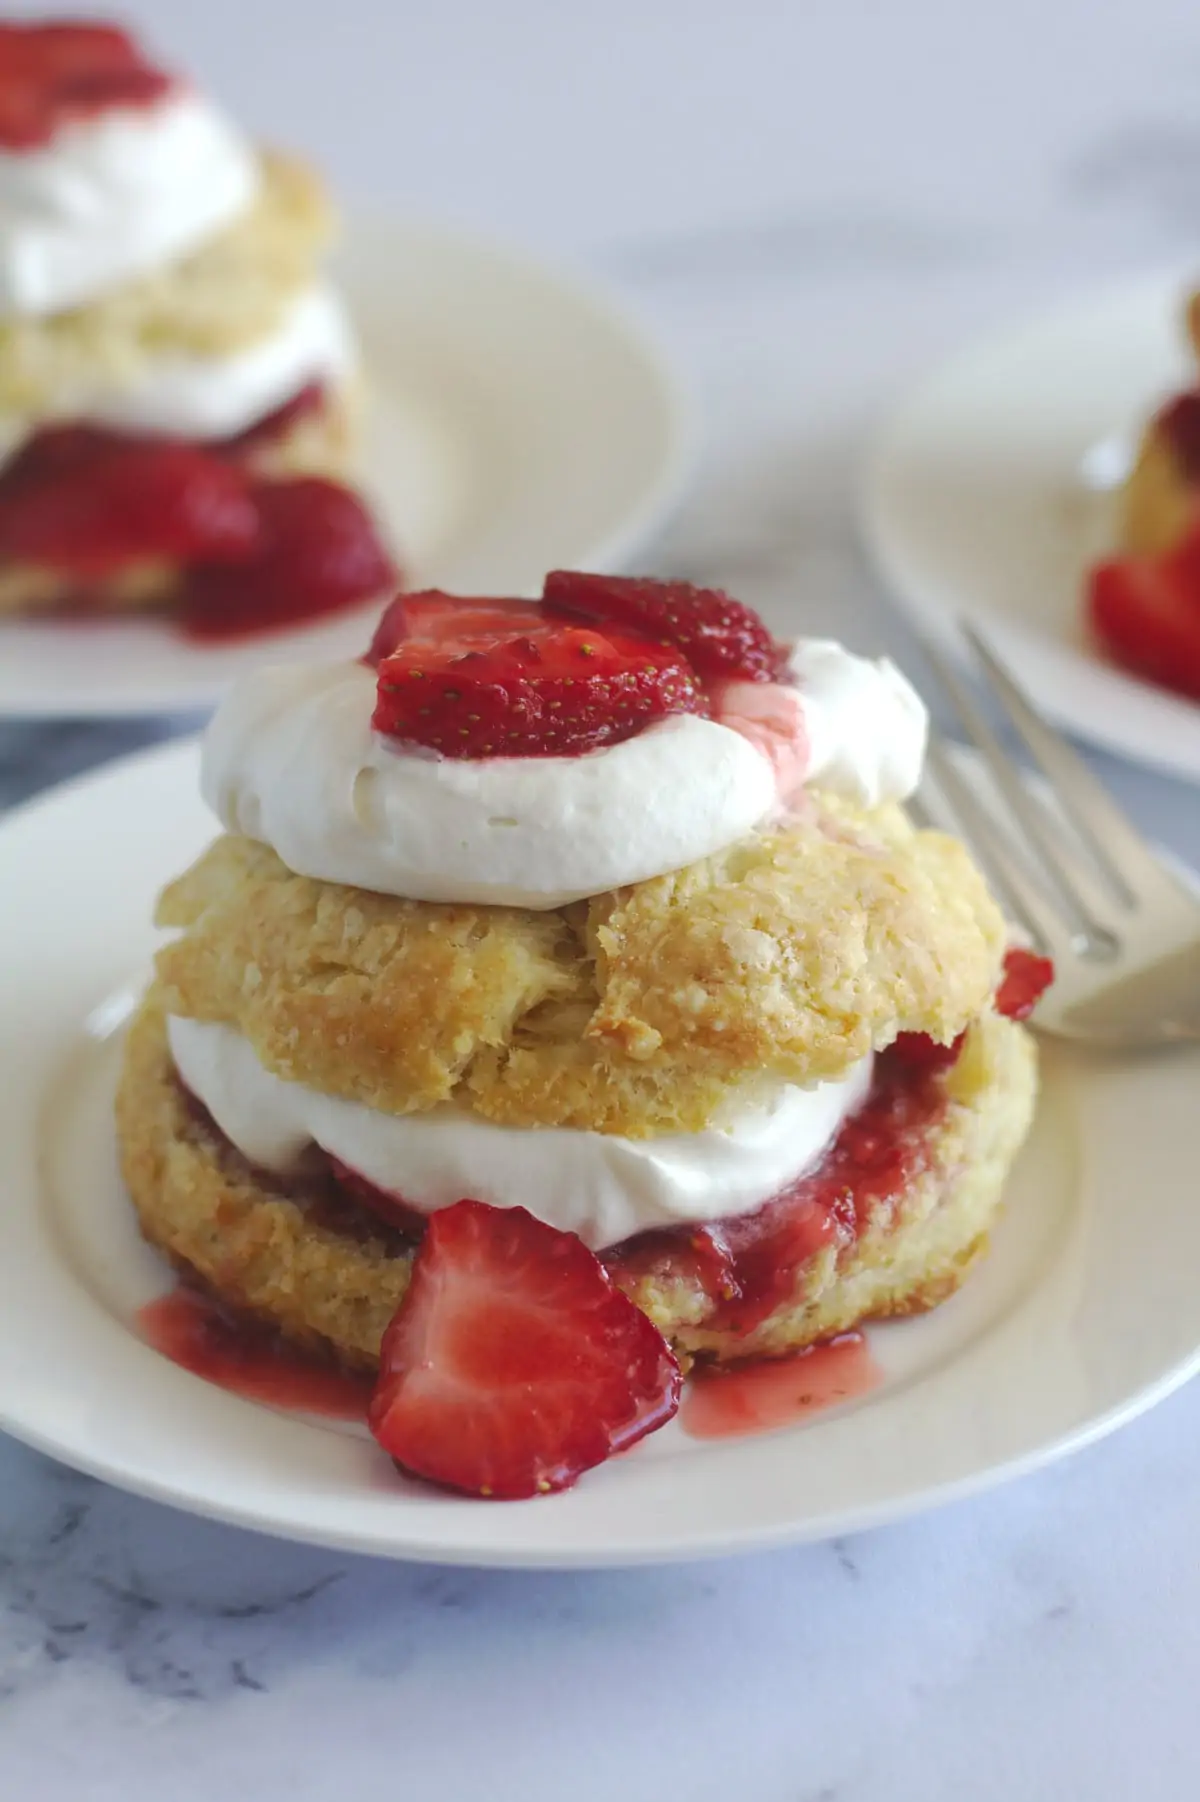 A strawberry shortcake on a plate with a fork.  